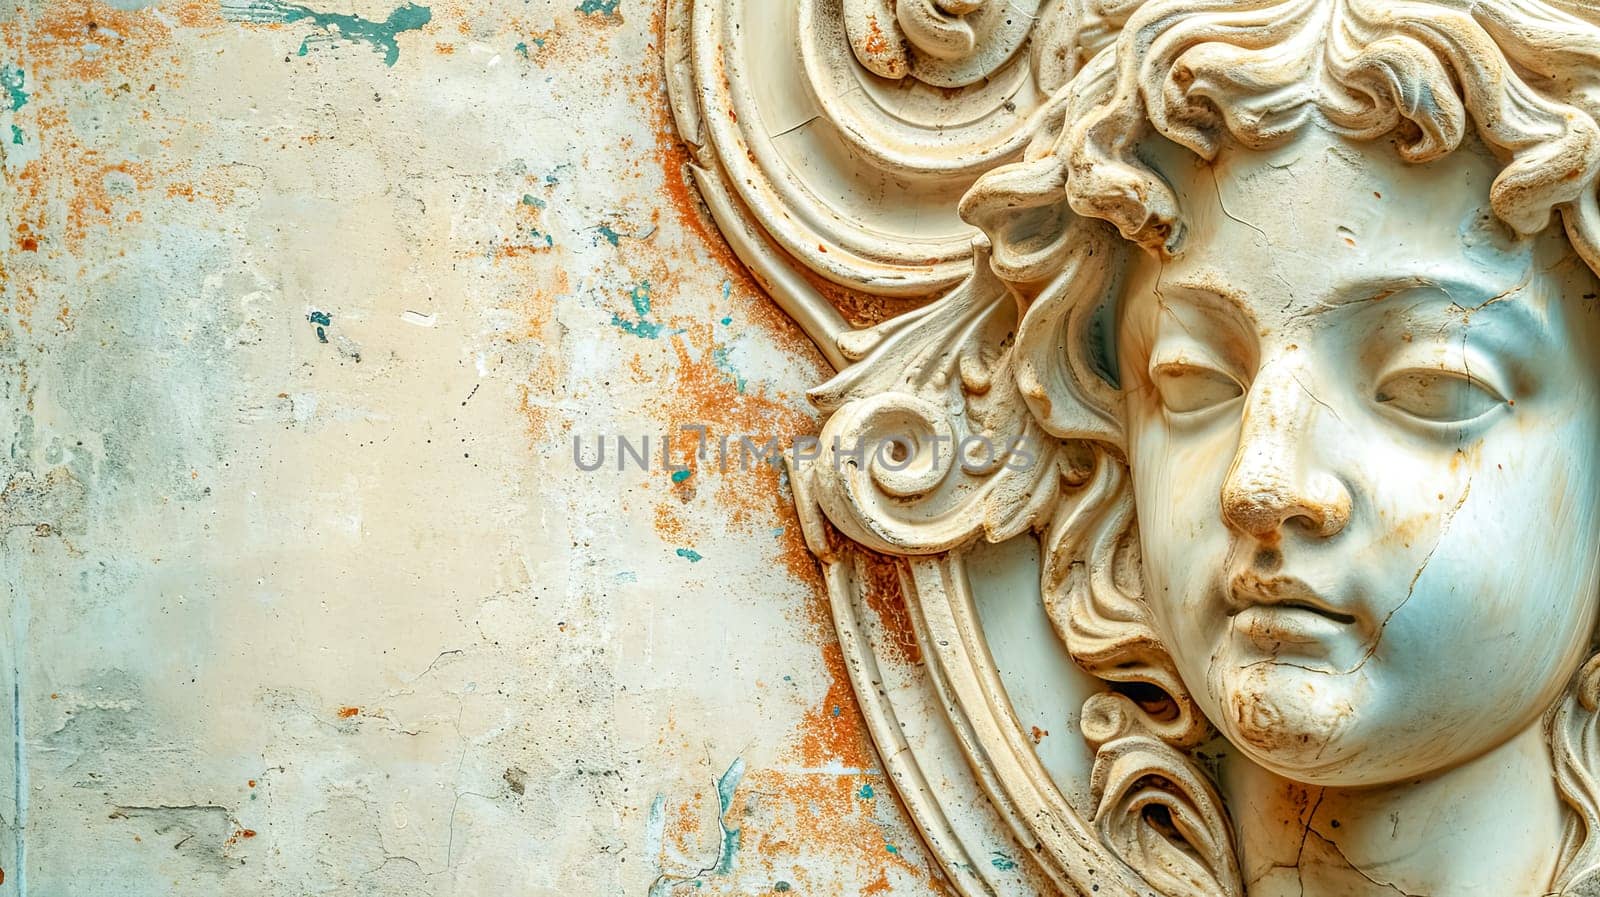 detailed sculpture of a serene female face with baroque elements, nestled within an ornate frame, wall with flaking paint and signs of decay, historical beauty juxtaposed with the passage of time